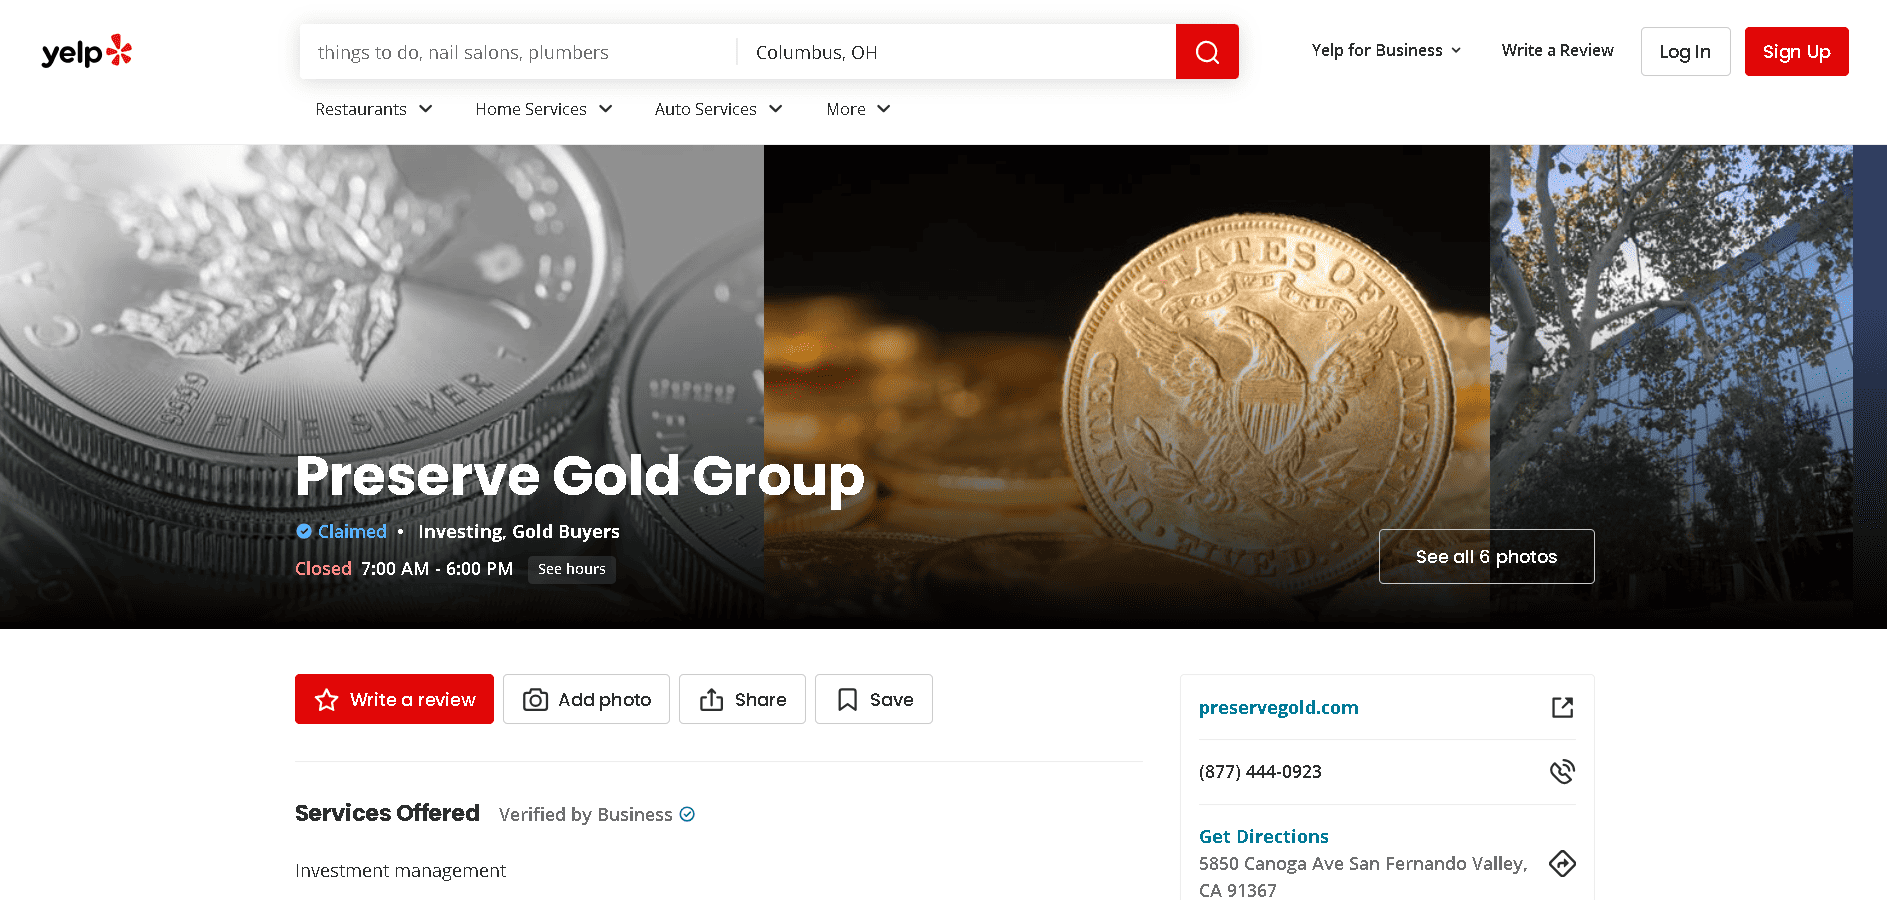 Preserve Gold Group yelp profile and customer reviews